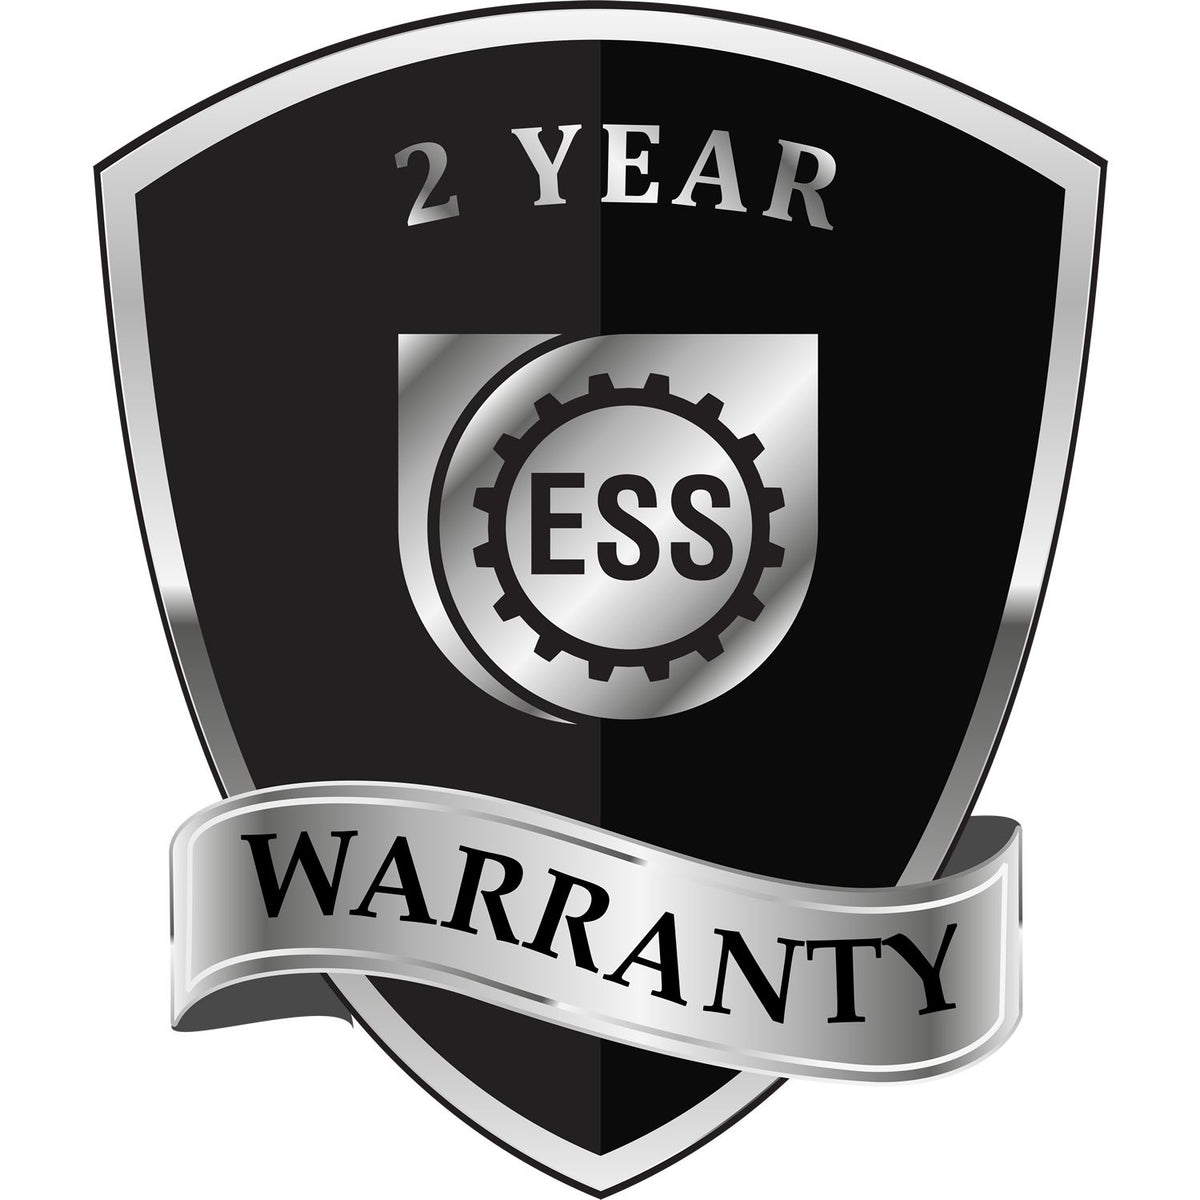 A black and silver badge or emblem showing warranty information for the Soft Ohio Professional Geologist Seal